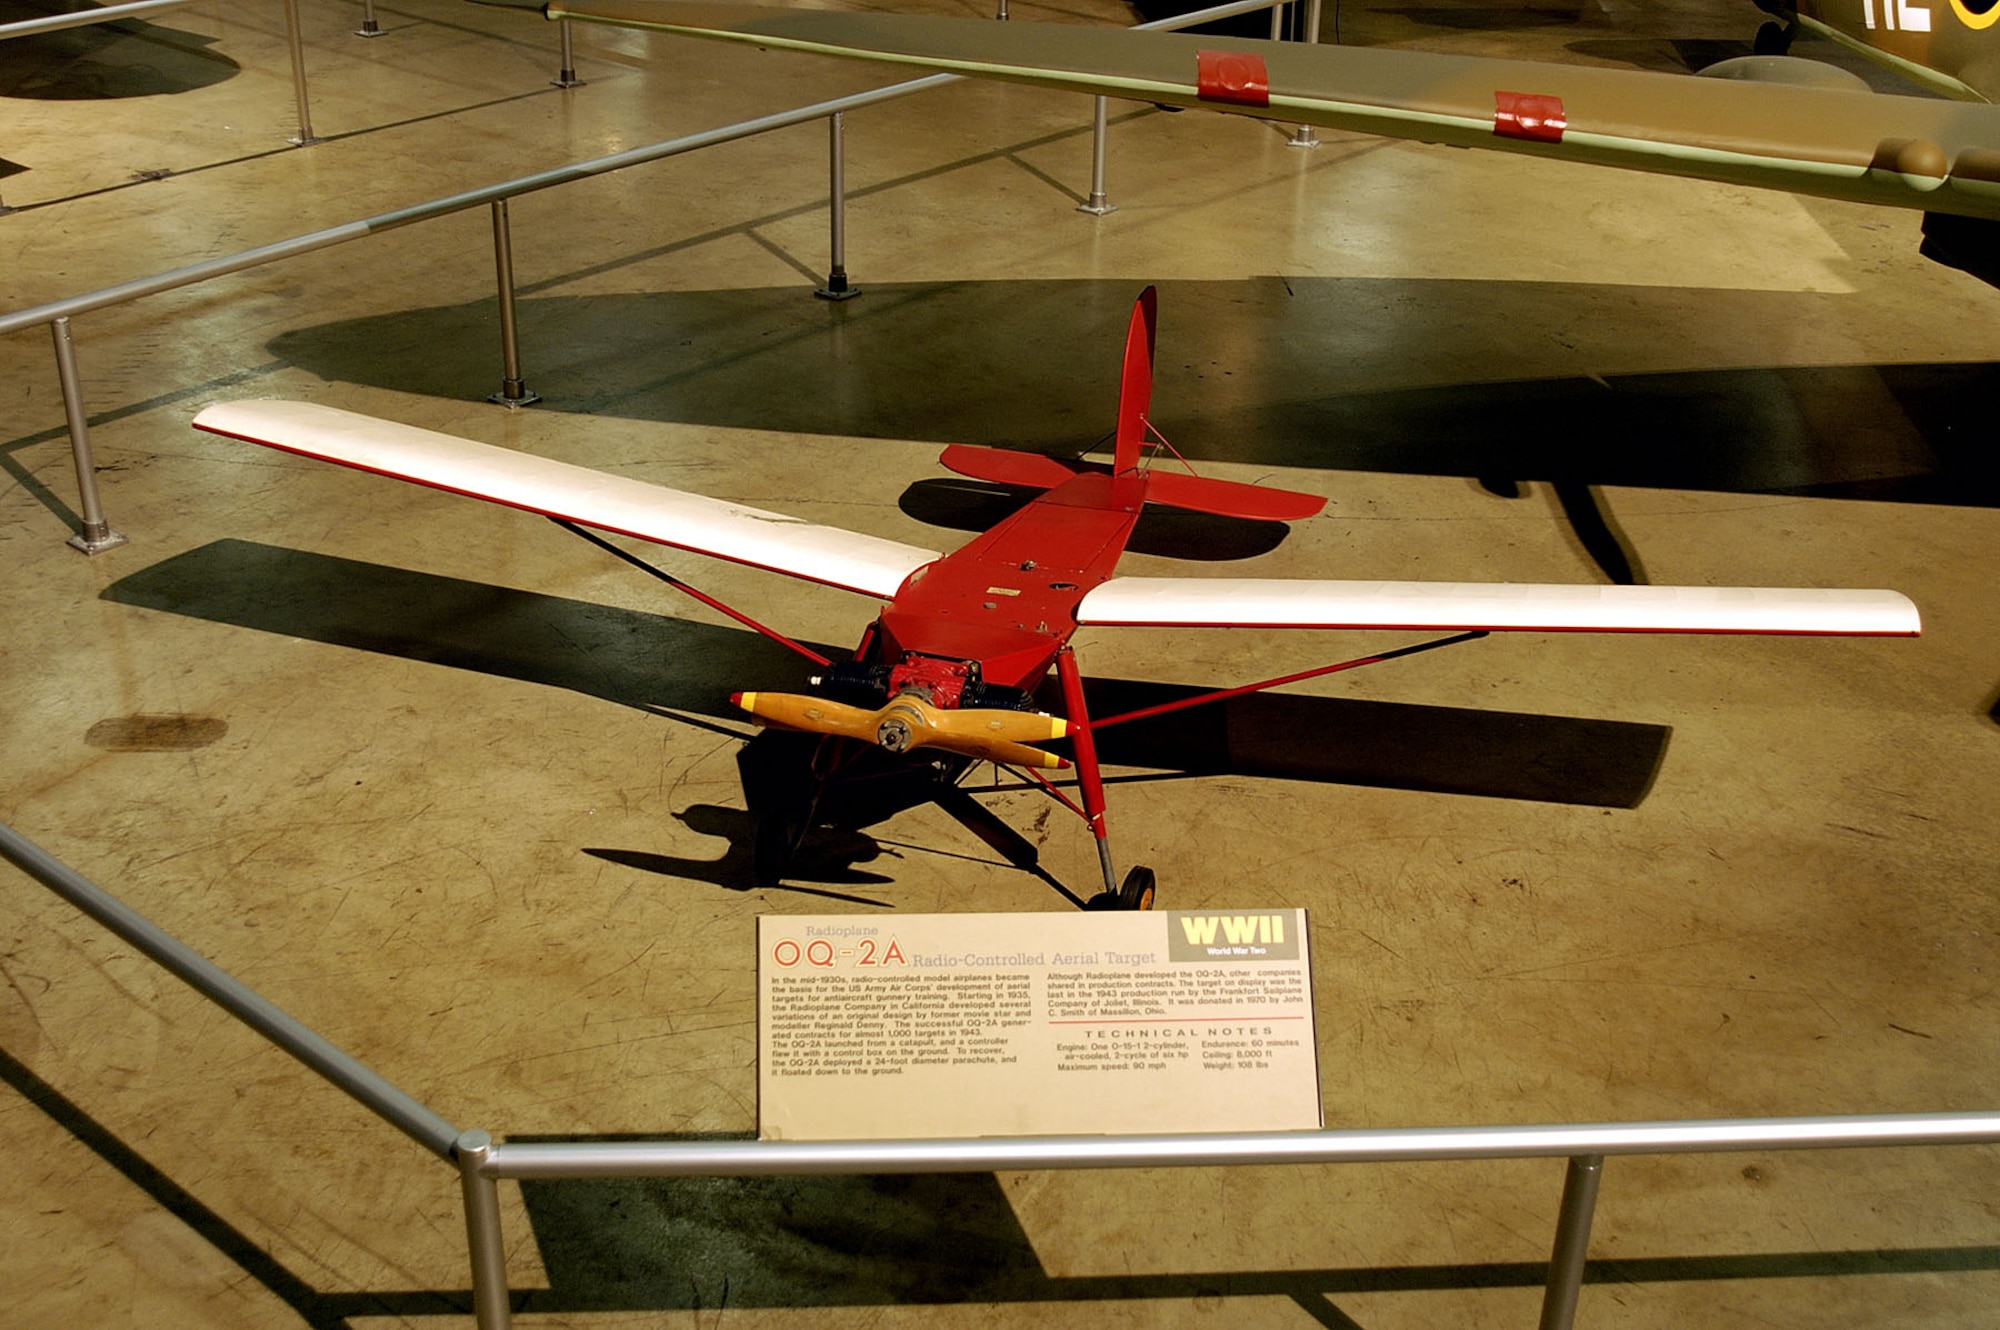 DAYTON, Ohio -- Radioplane OQ-2A in the World War II Gallery at the National Museum of the United States Air Force. (U.S. Air Force photo)